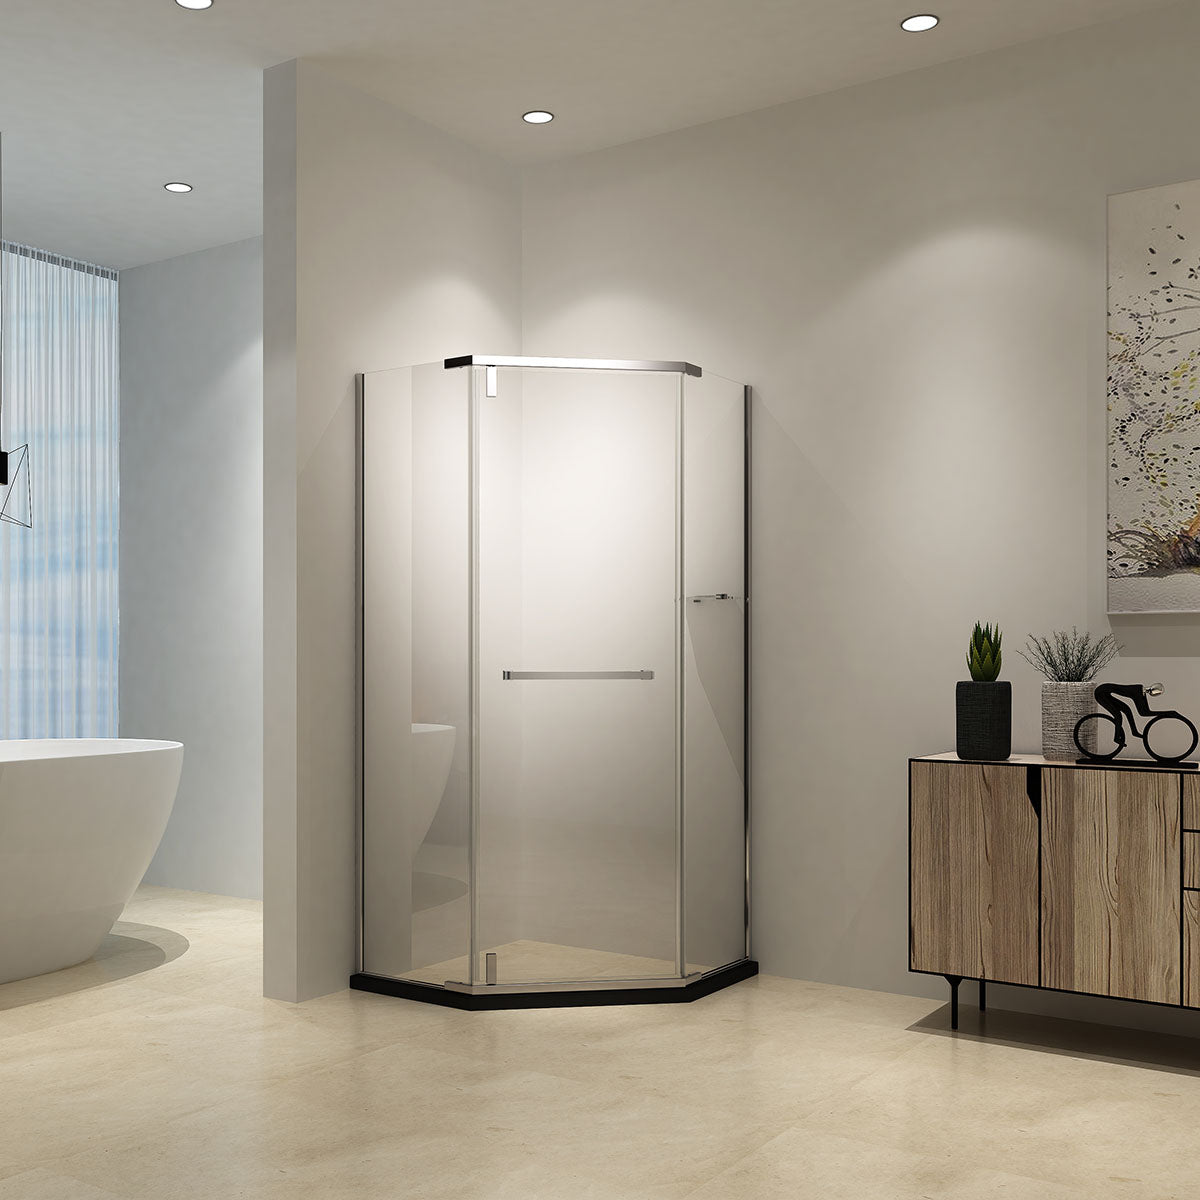 Neo Maggie Angle G06 Hinged Shower Door  36"W X 36"W X 76"H & 40"W X 40"W X 76"H (3/8" Thickness) (Chrome or Brushed Nickel) - iStyle Bath